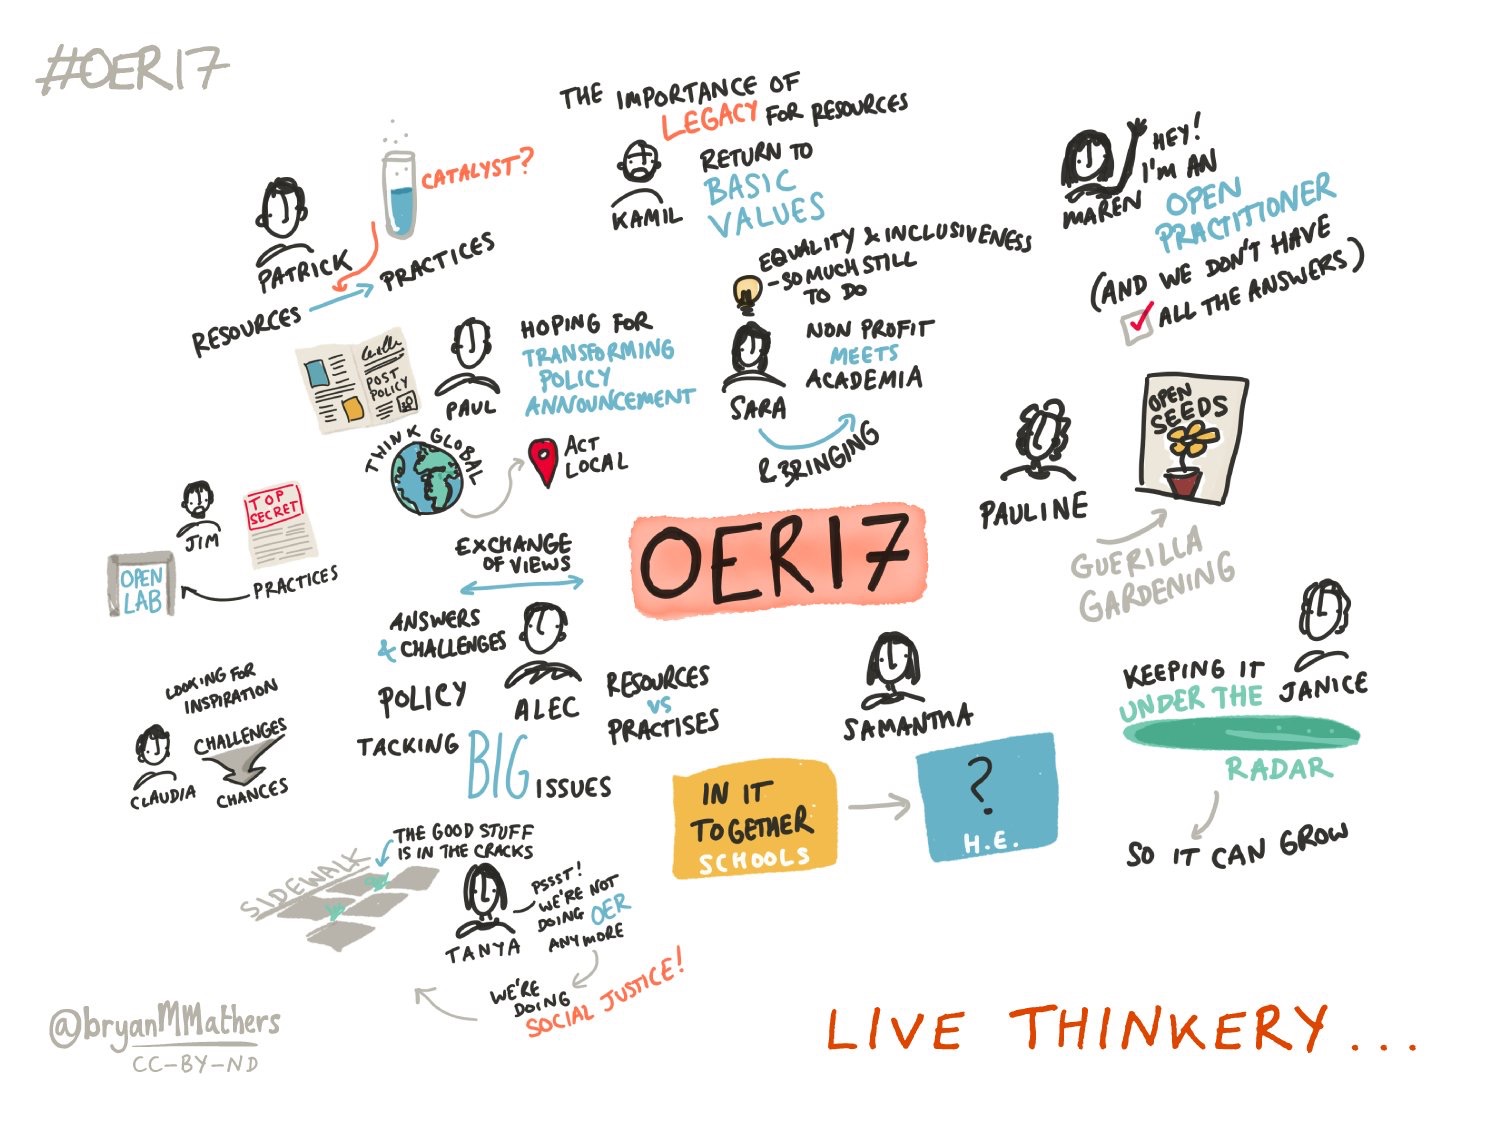 Live visual thinkery by @BryanMMathers CC-BY-ND